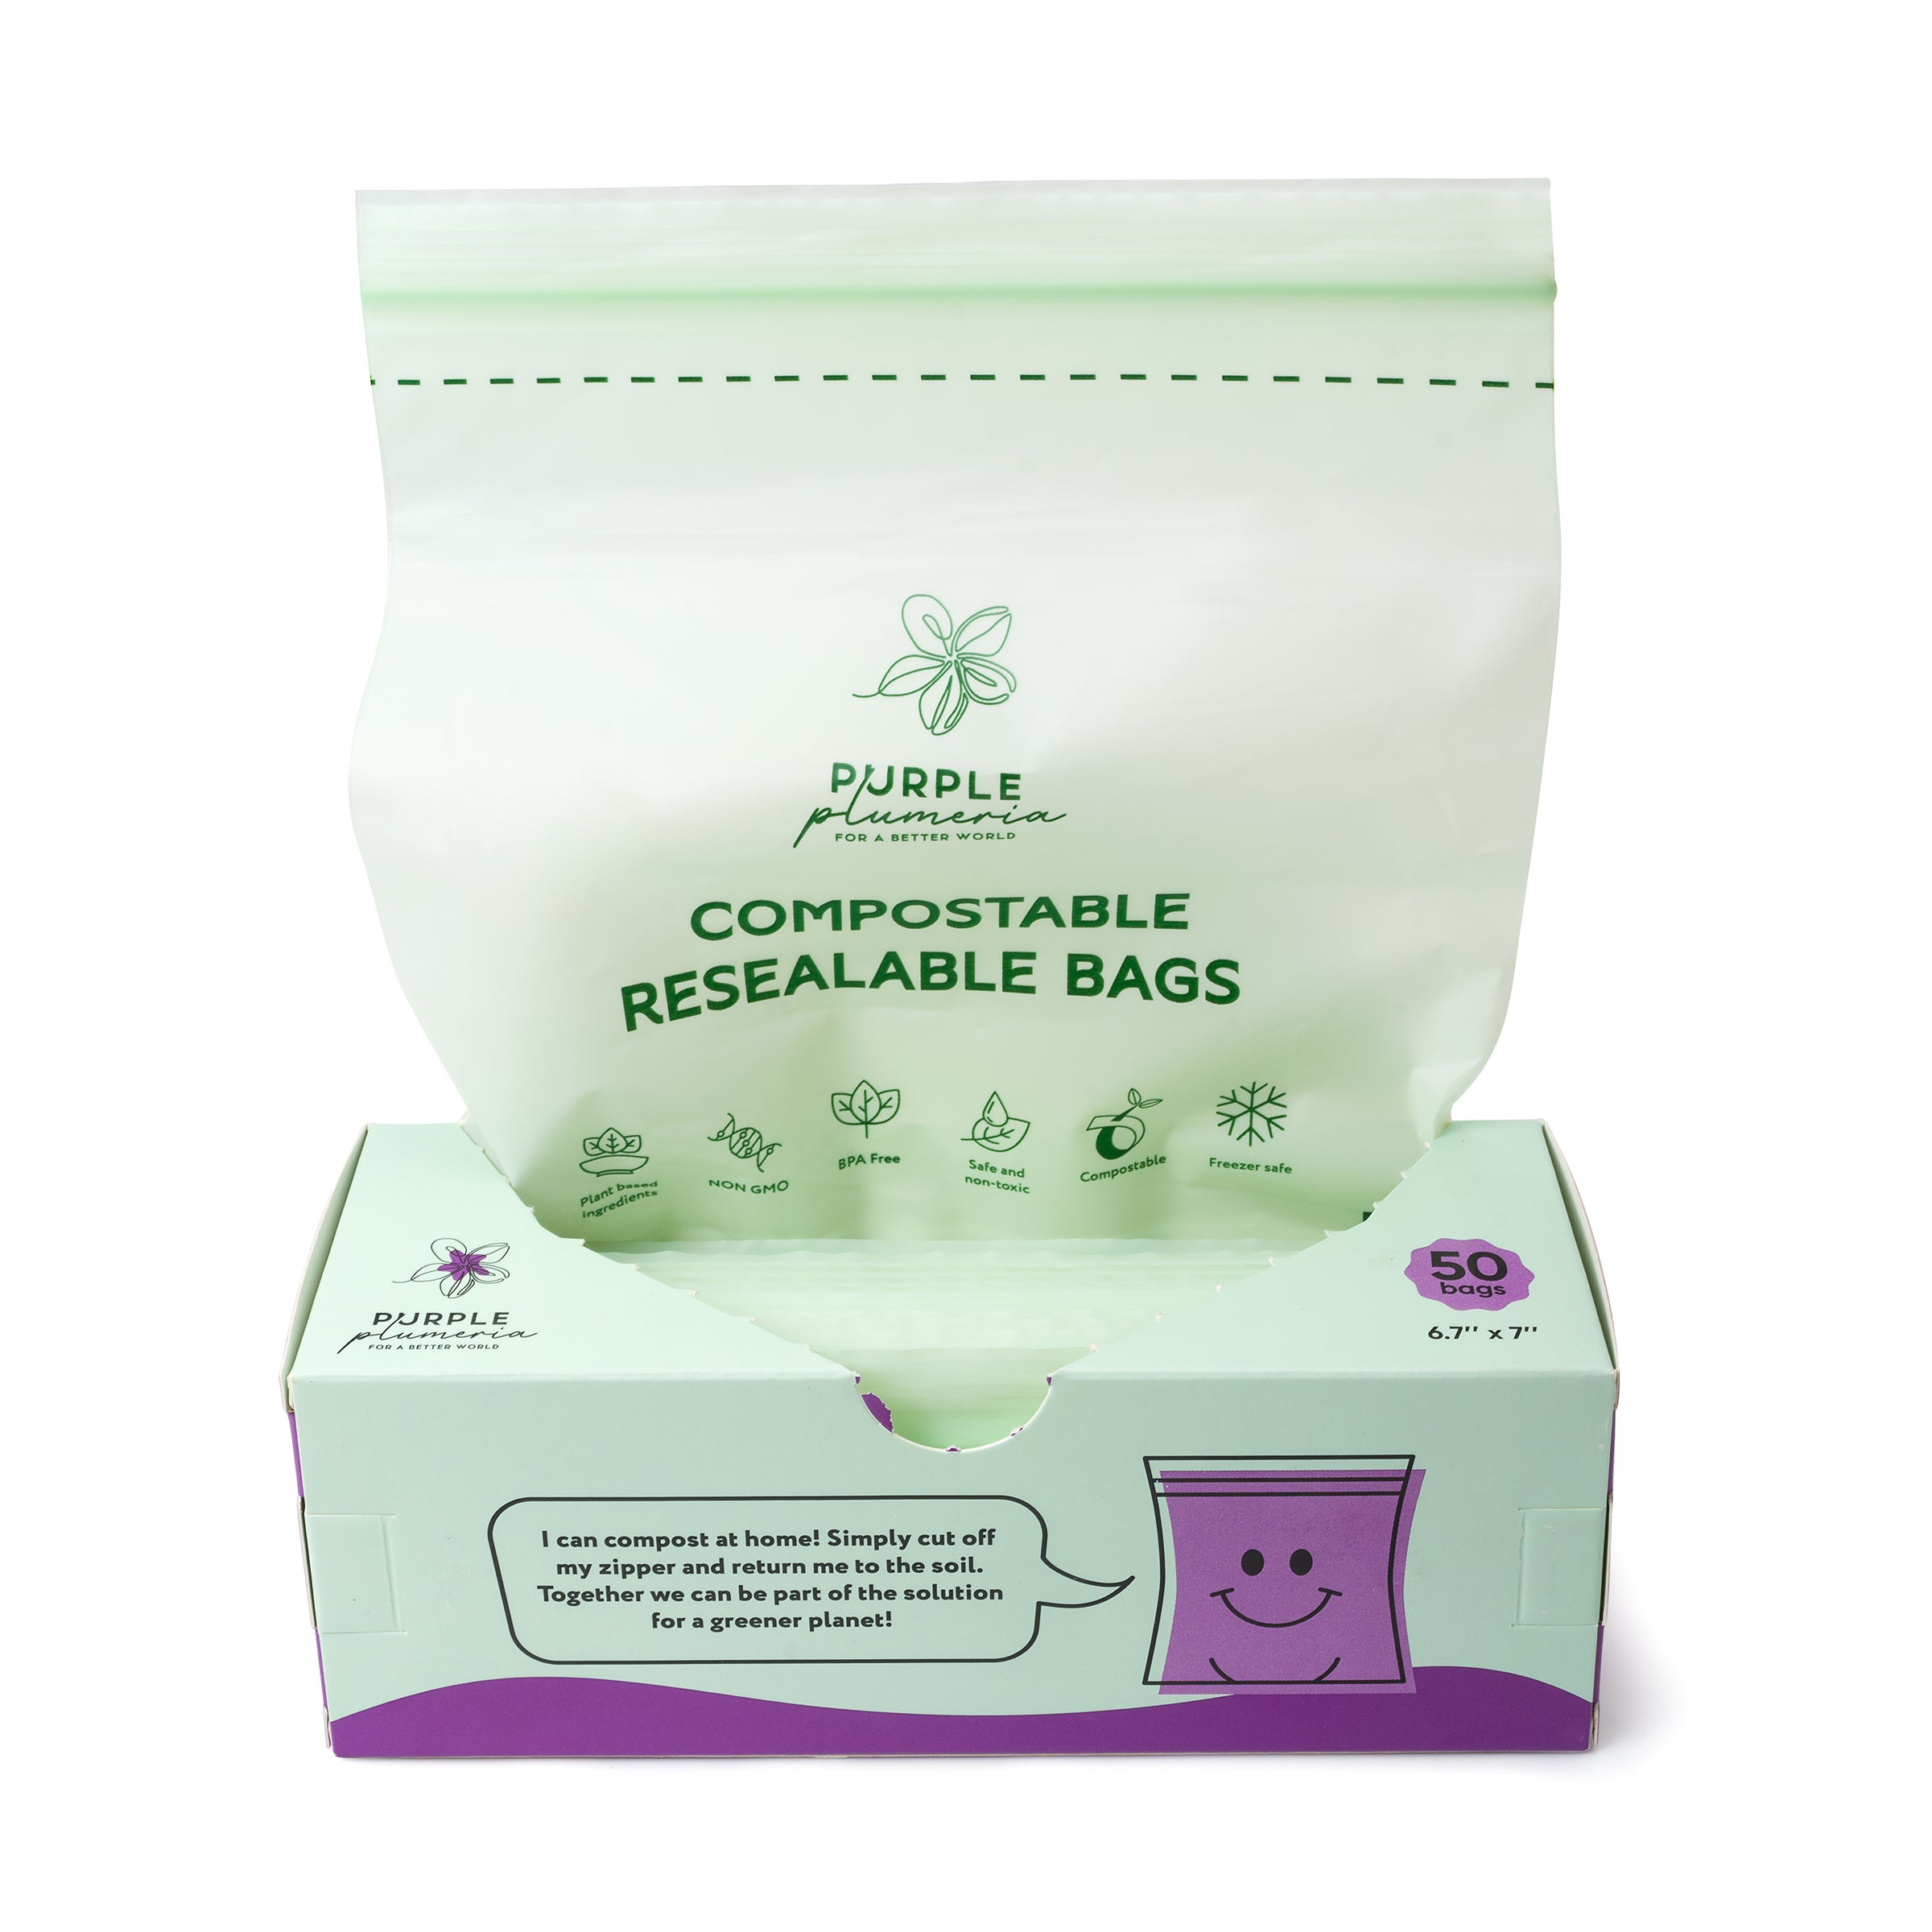 Compostable And Resealable Bags For Food, Snacks And Sandwiches. Eco-Friendly And Biodegradable.